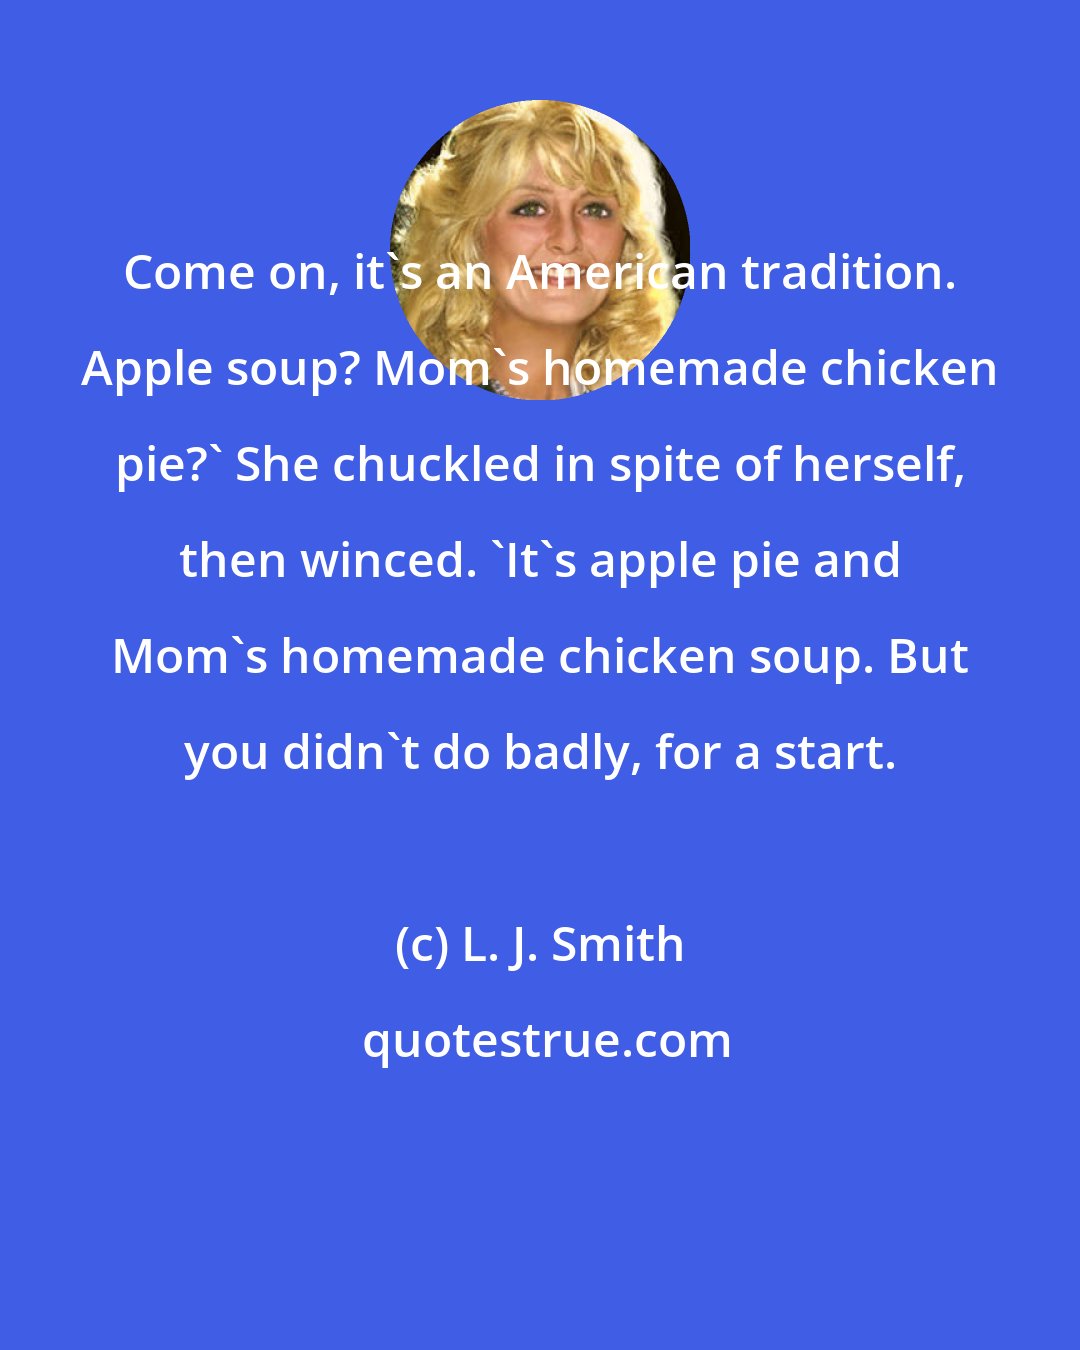 L. J. Smith: Come on, it's an American tradition. Apple soup? Mom's homemade chicken pie?' She chuckled in spite of herself, then winced. 'It's apple pie and Mom's homemade chicken soup. But you didn't do badly, for a start.